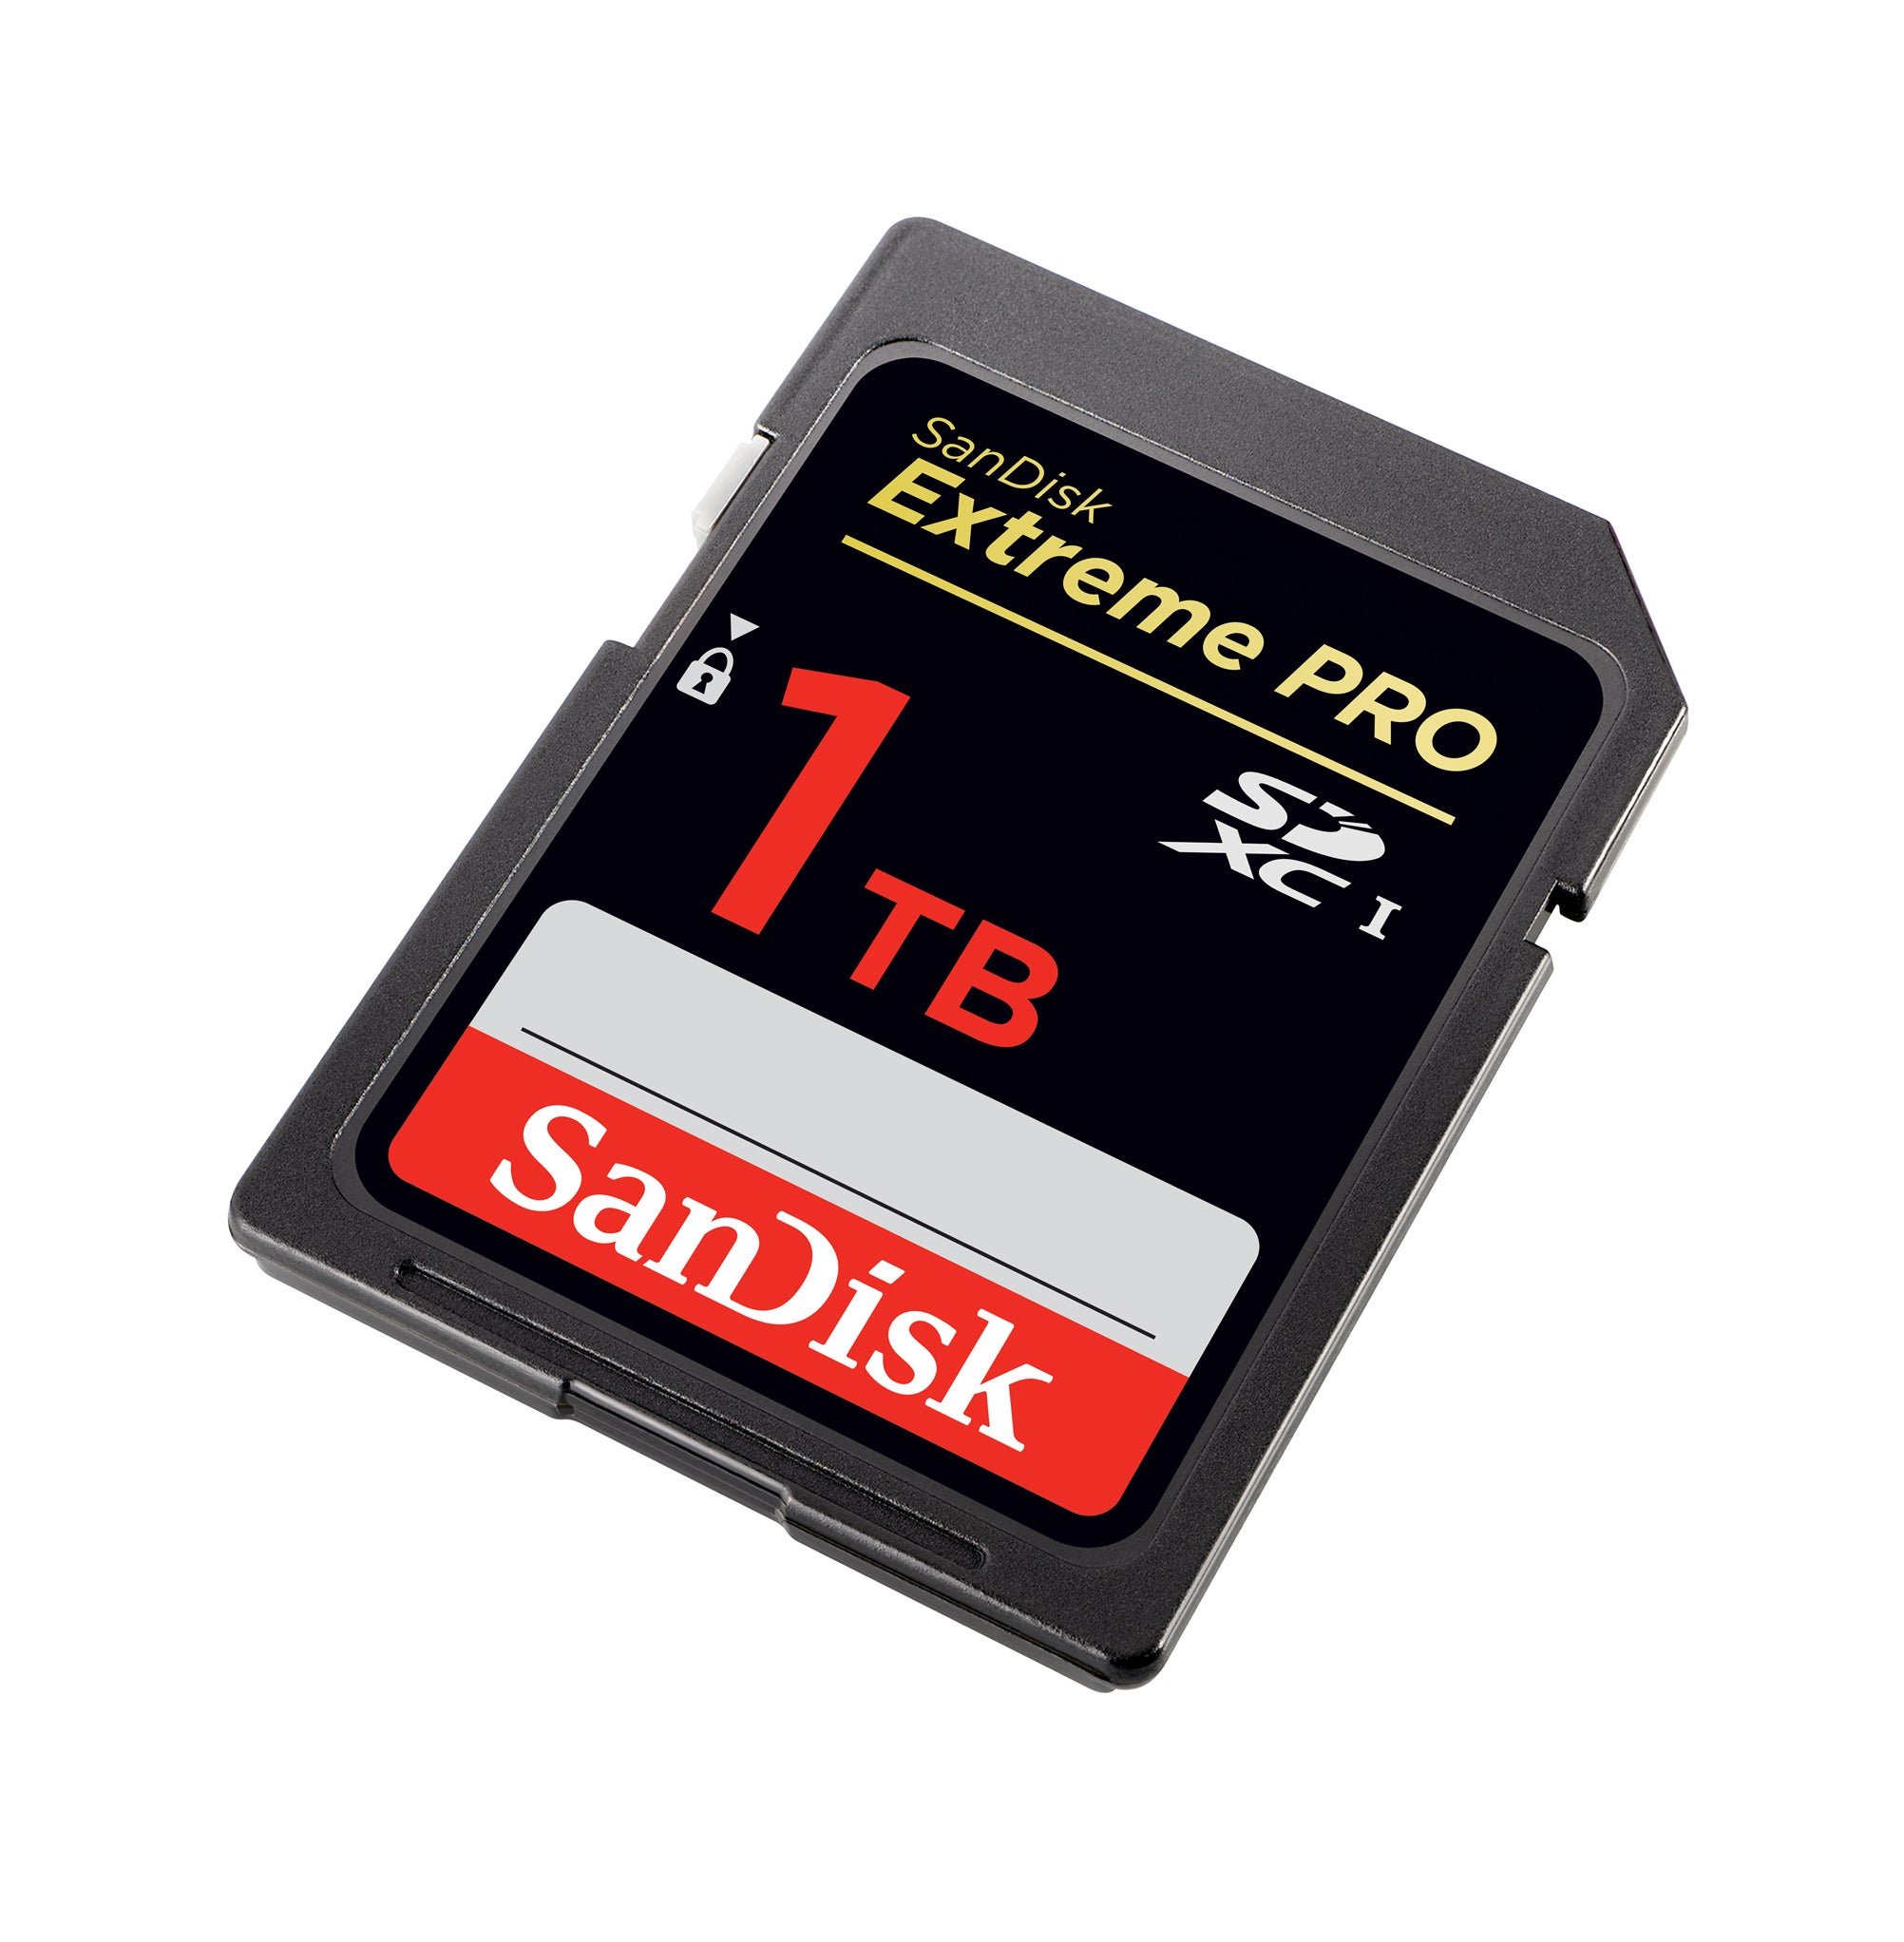 Boom SanDisk just dropped the world's largest SD card